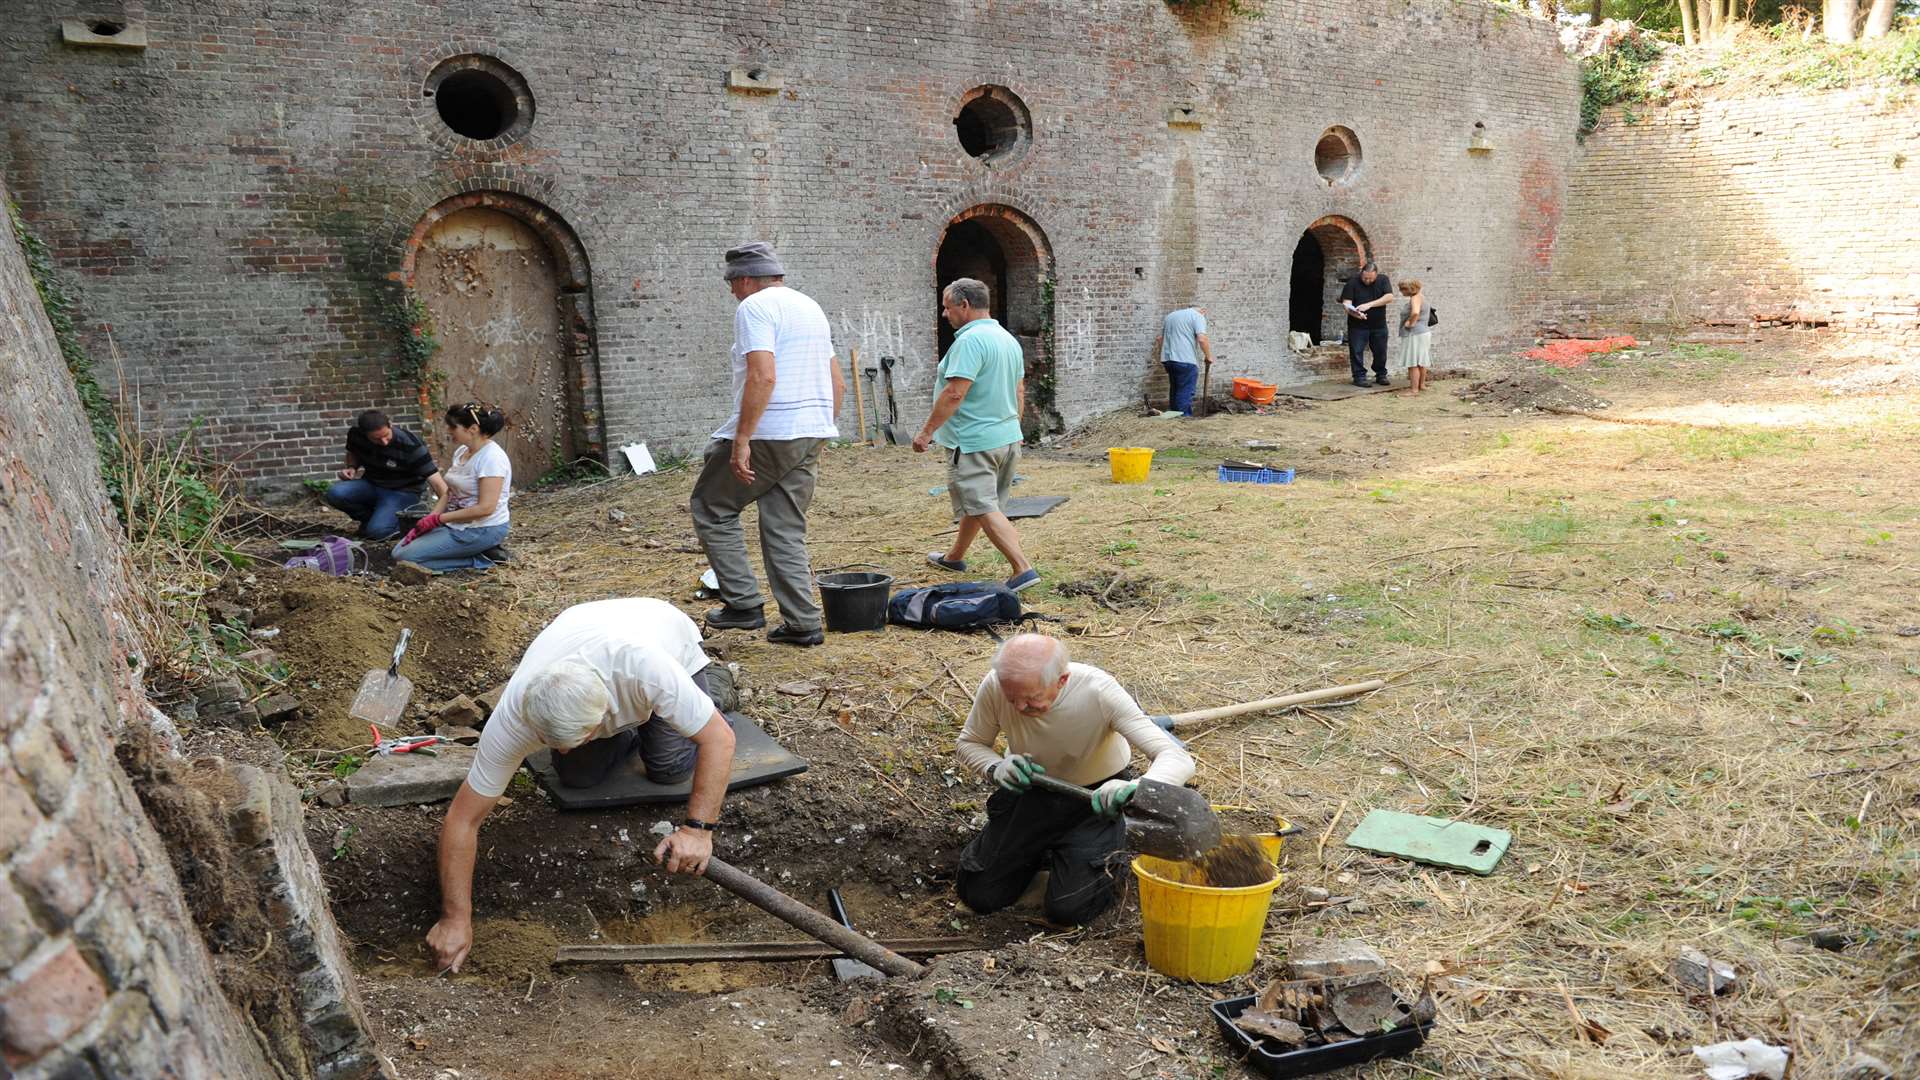 Archeological digs have taken place at the fort